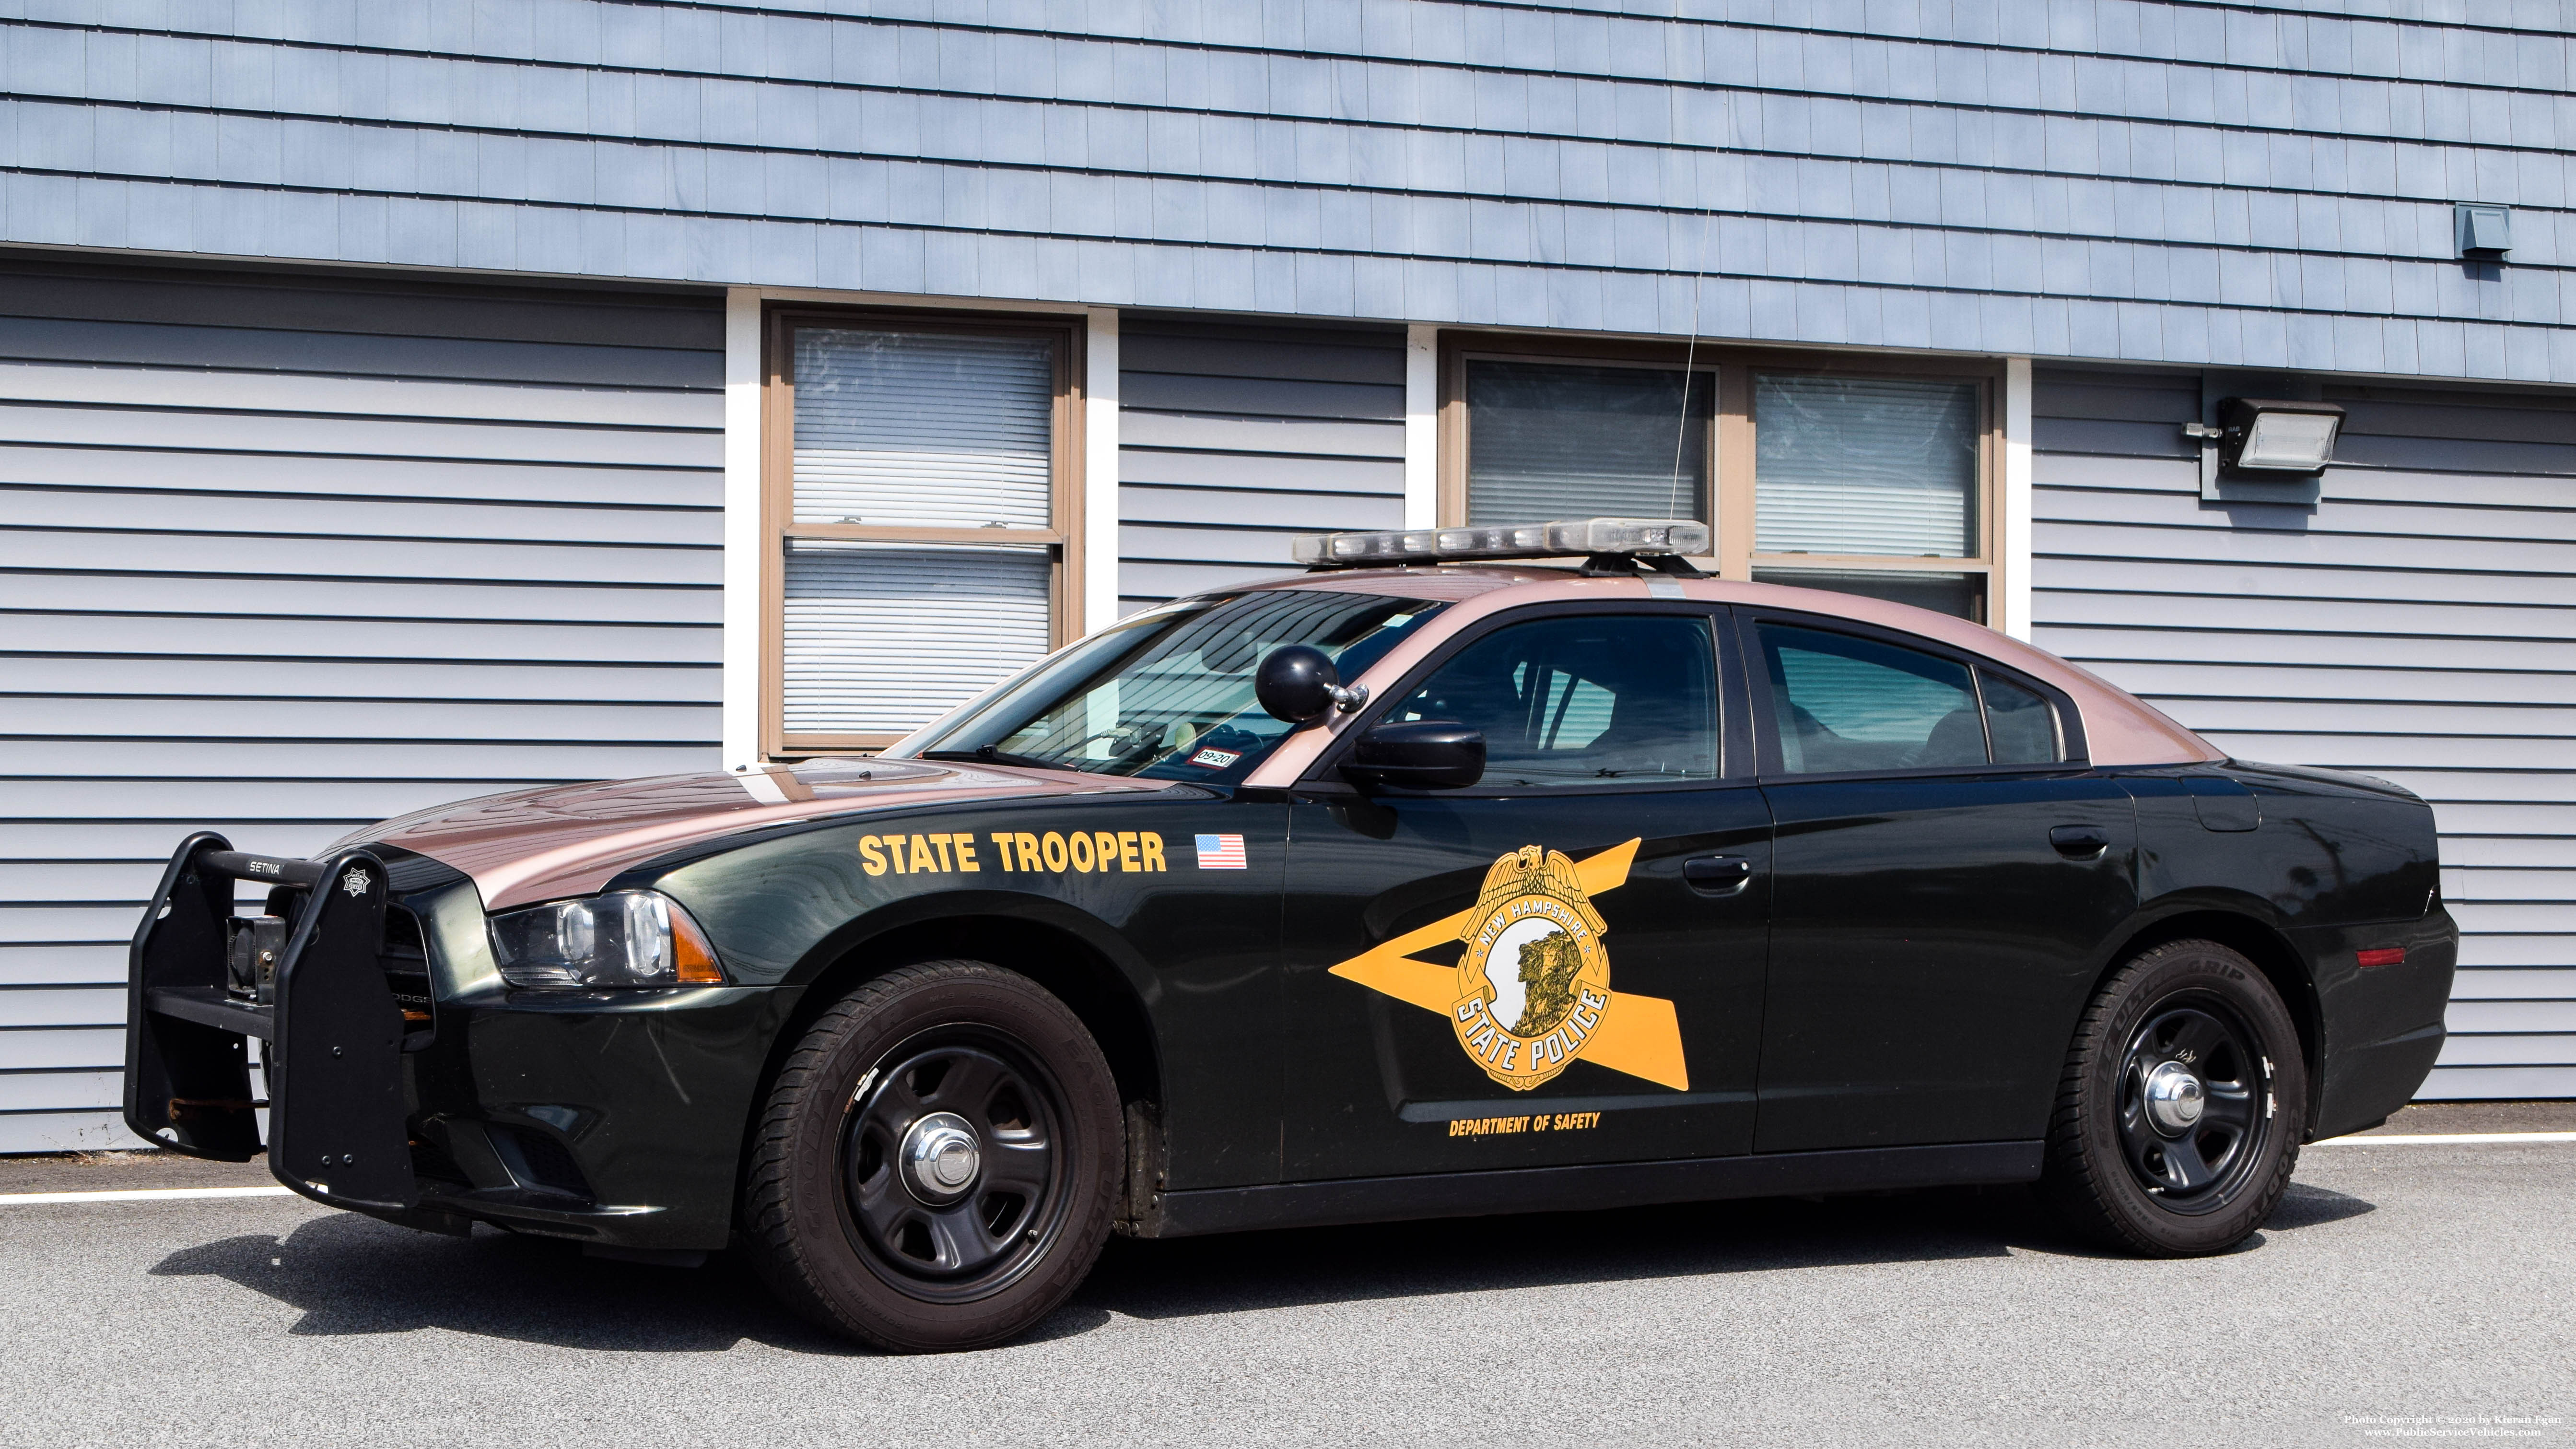 A photo  of New Hampshire State Police
            Cruiser 625, a 2011-2014 Dodge Charger/Whelen Liberty Series             taken by Kieran Egan